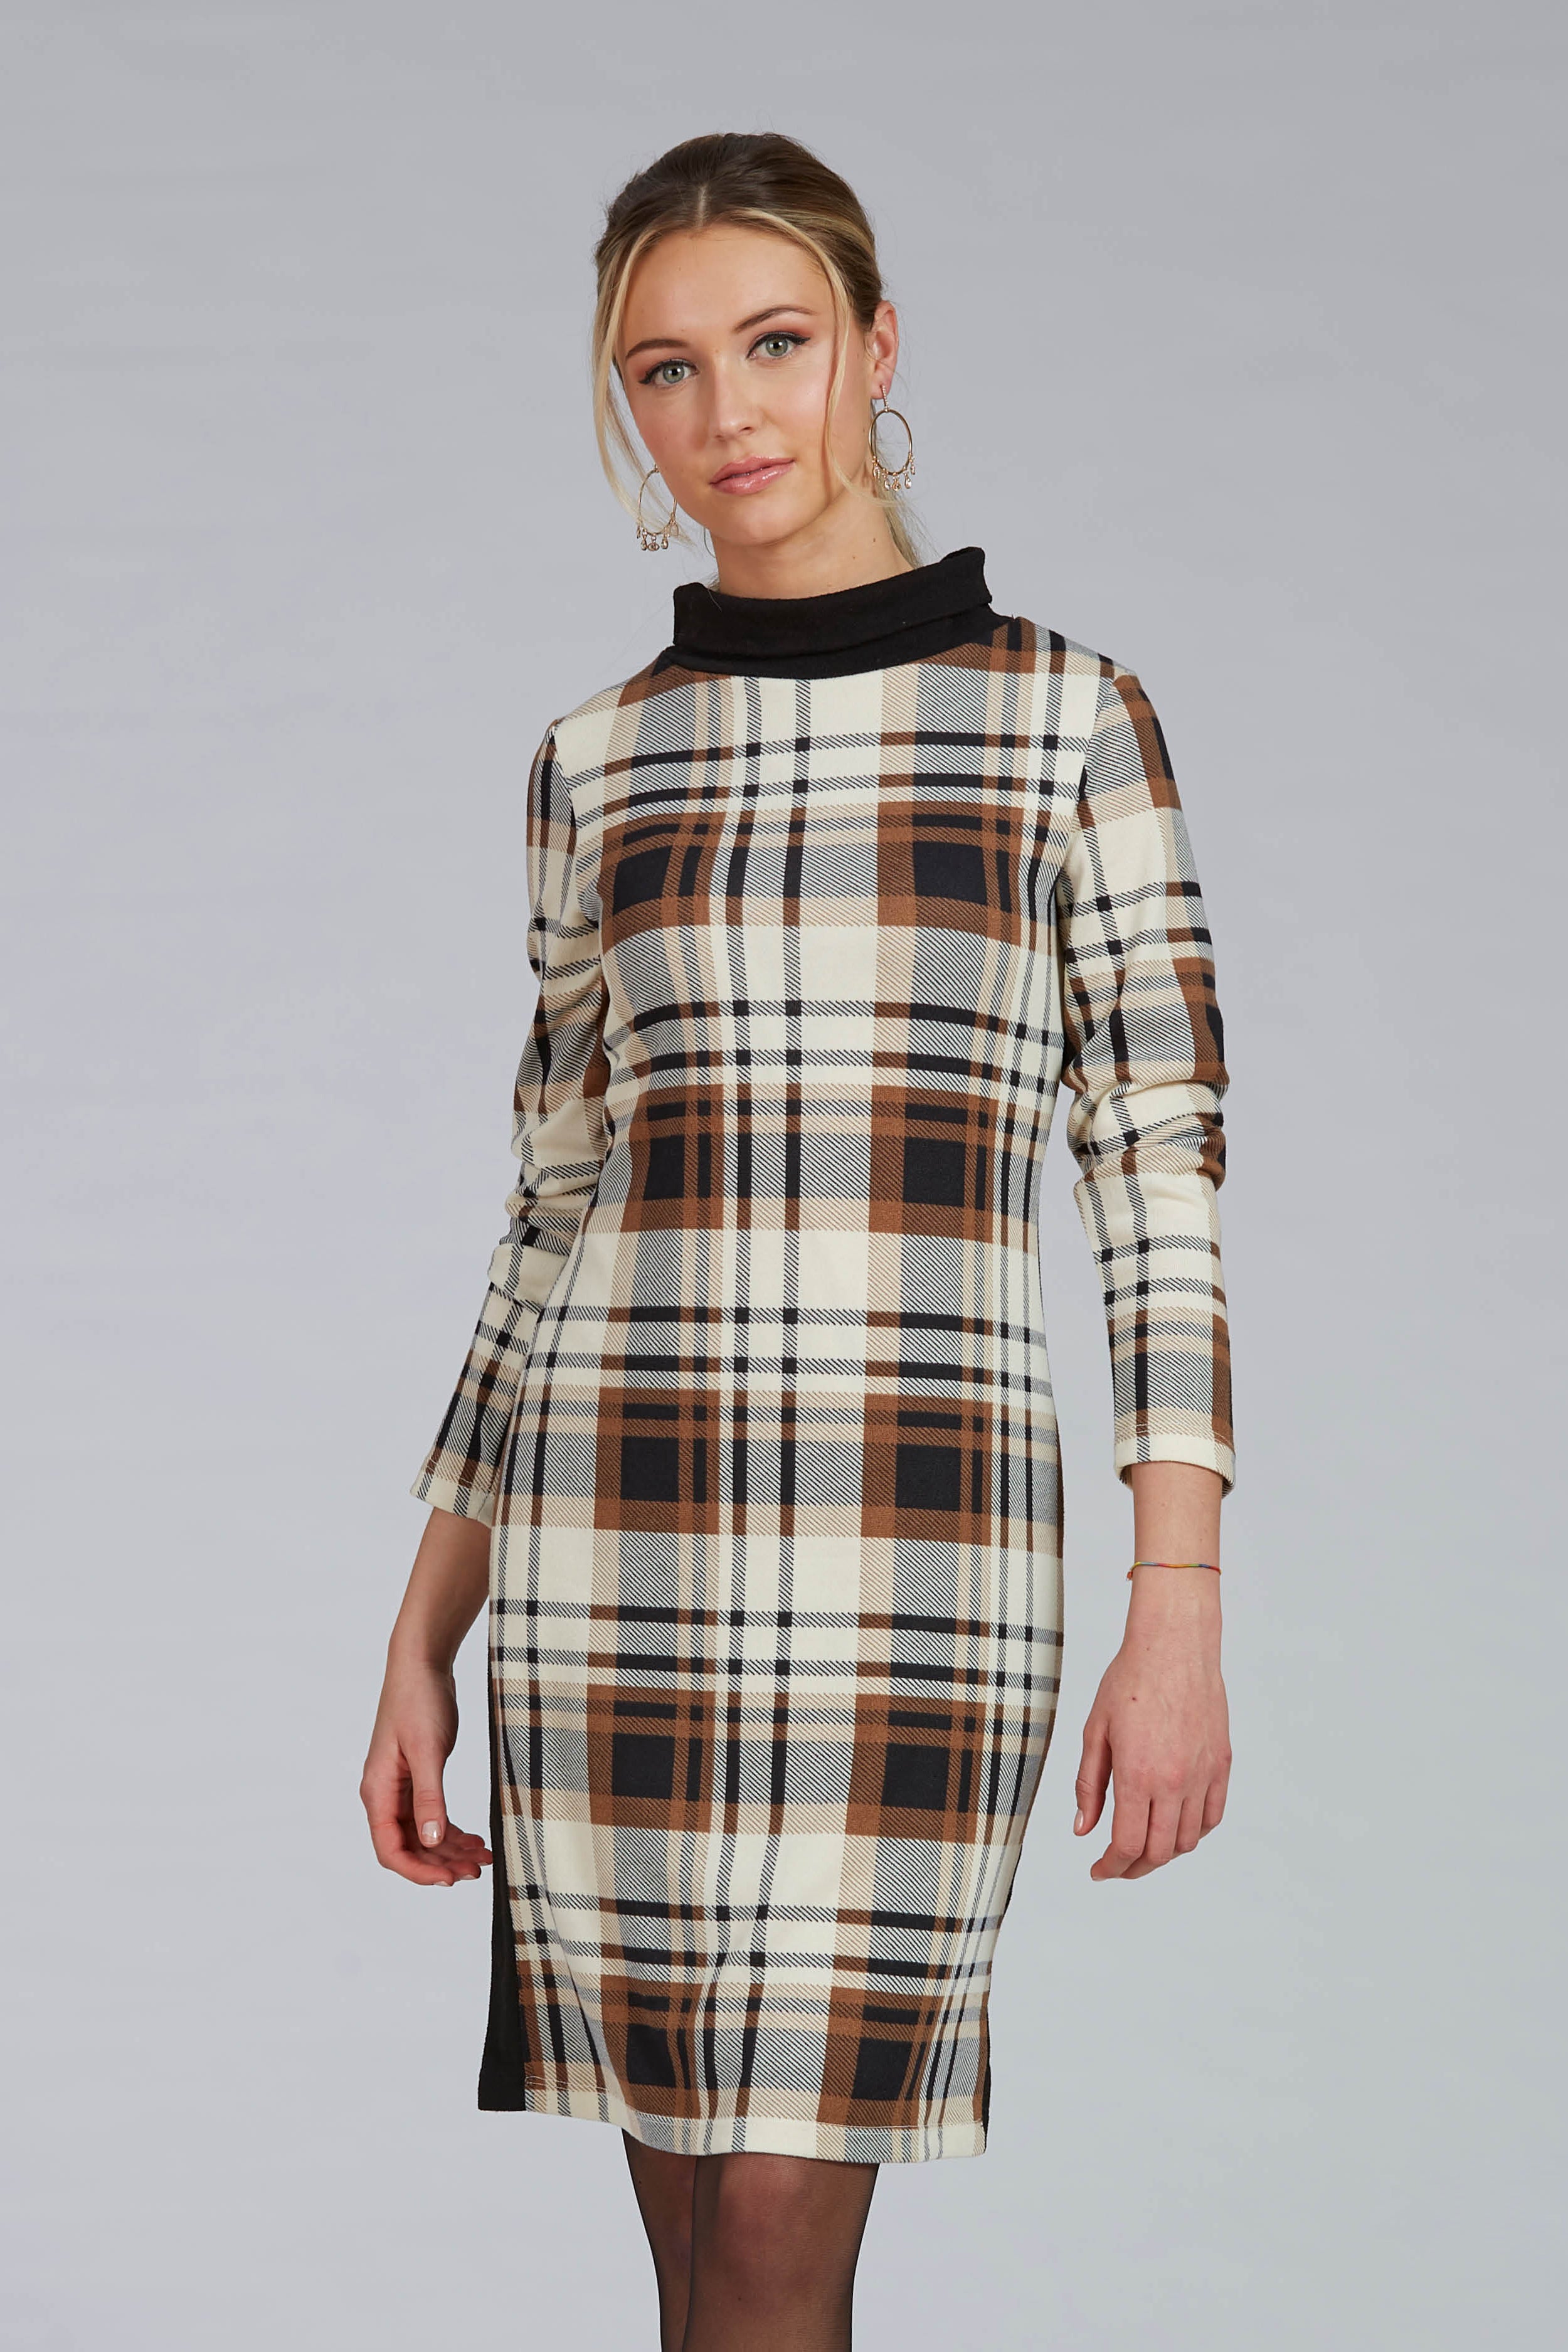 Iseult Dress by Luc Fontaine, Caramel Print, plaid, contrast black collar, long sleeves, knee length, sizes 4-16, made in Canada